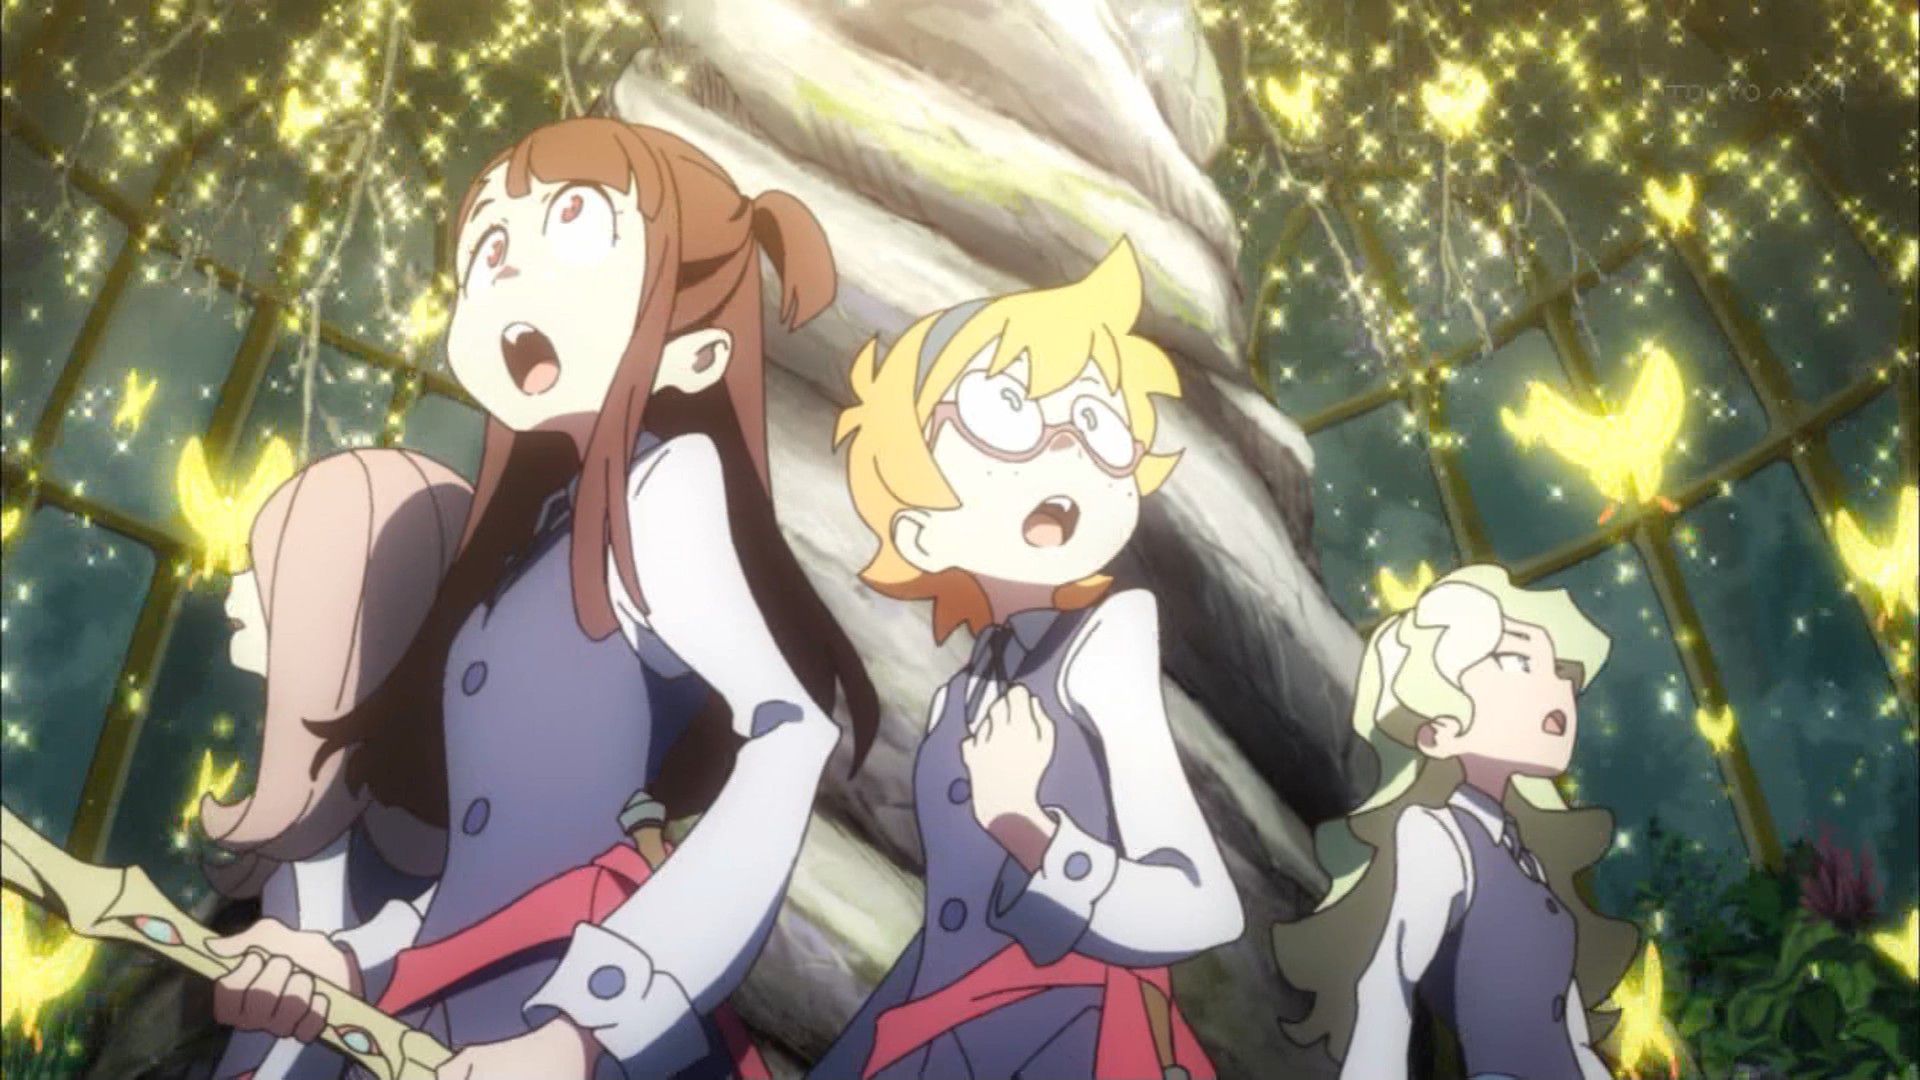 And want to show "little witch academia's story, children cartoons! 22